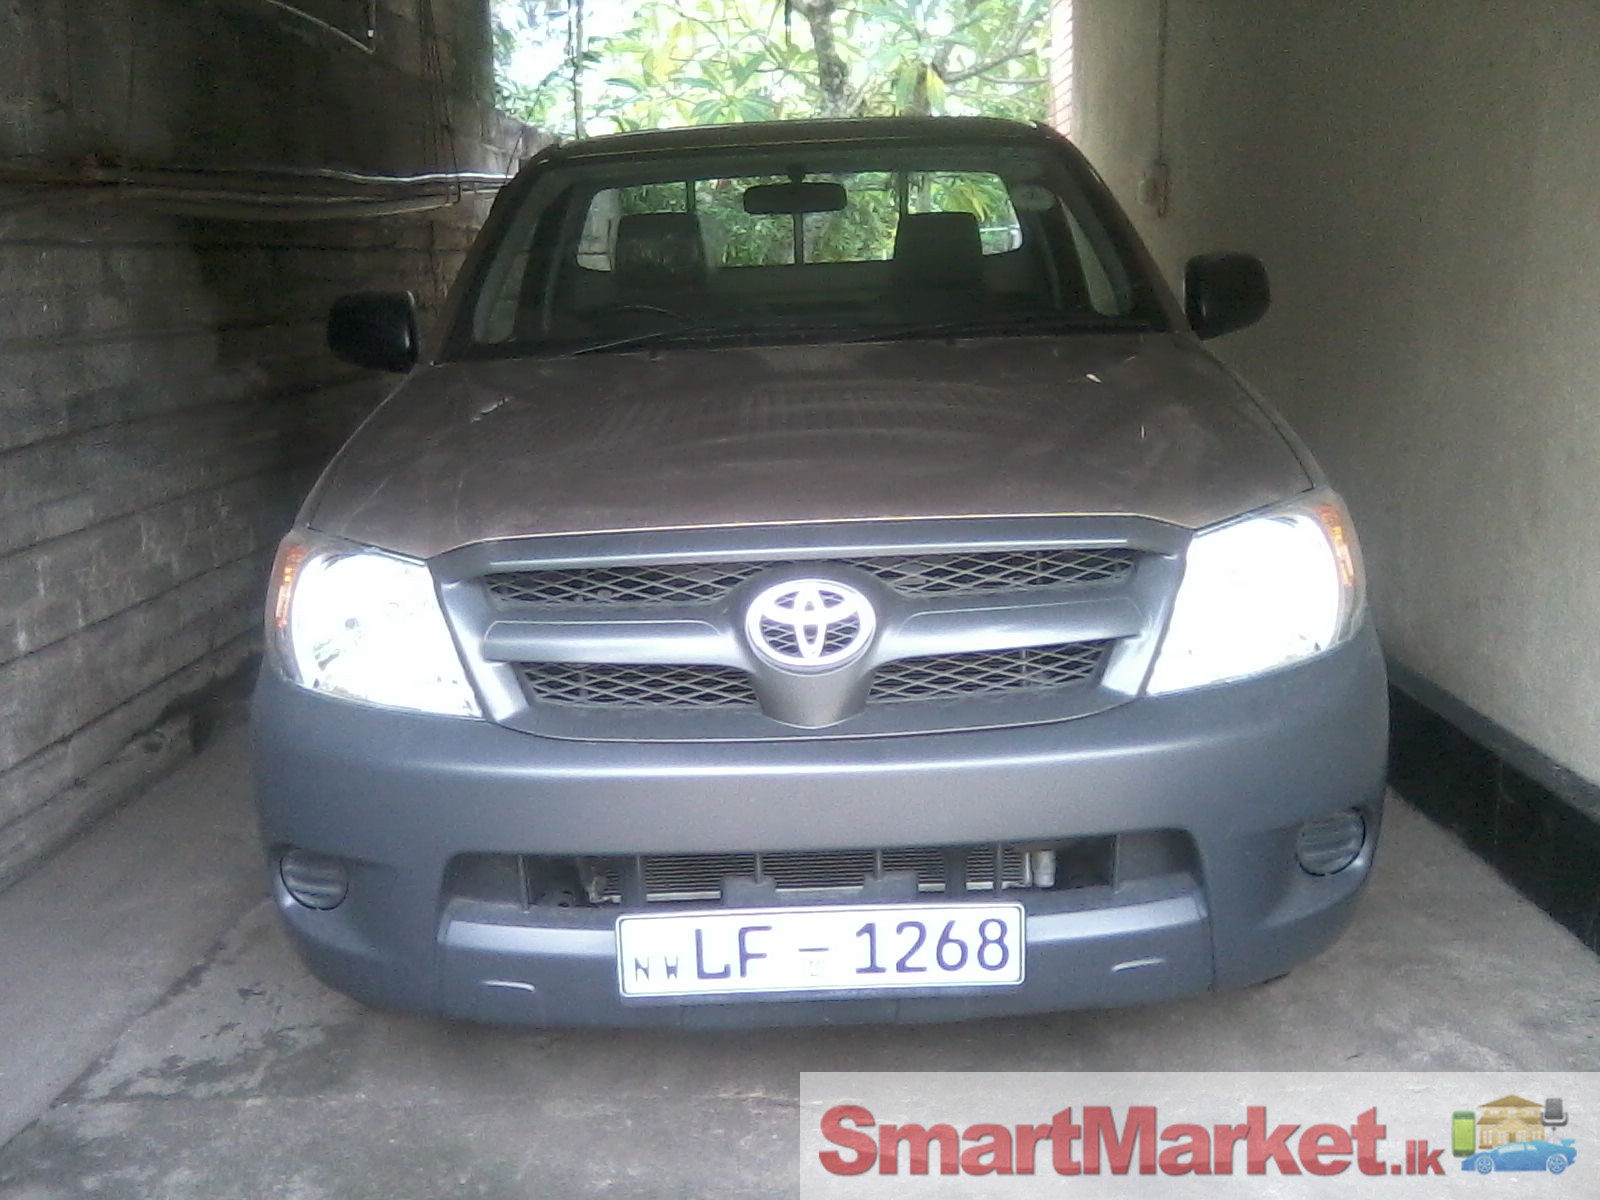 Toyota Hilux Single cab- Done only 4000 KM